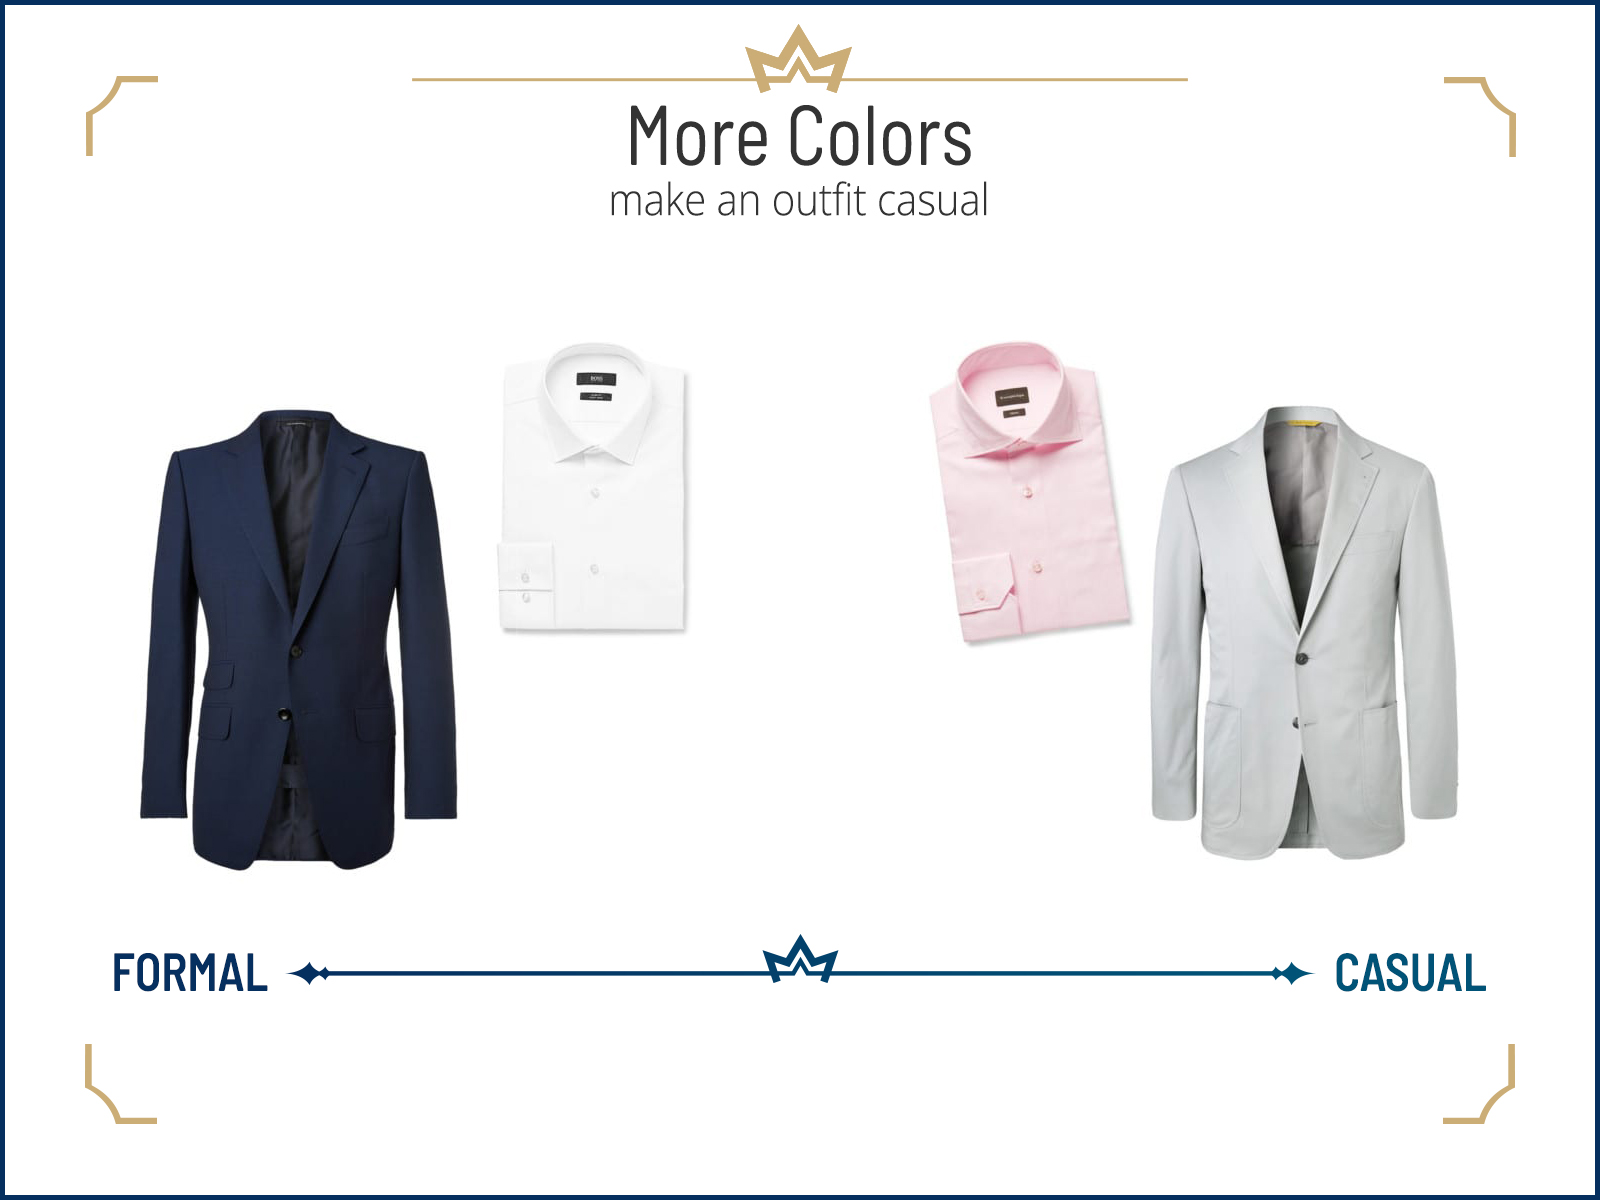 More colors lean toward a more casual style